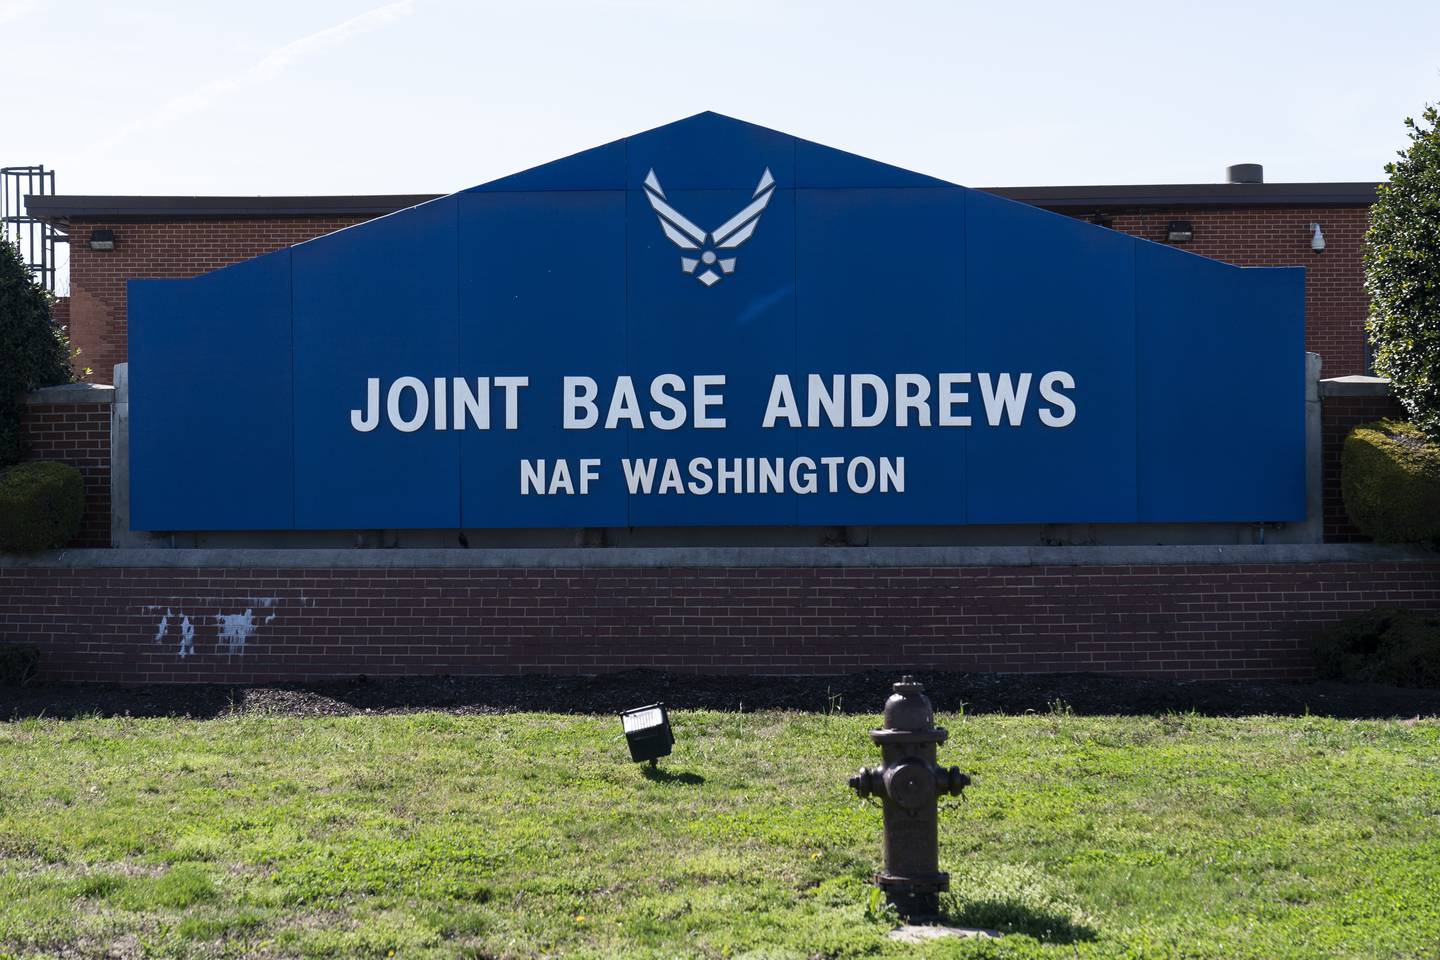 FILE - The sign for Joint Base Andrews is seen on March 26, 2021, at Andrews Air Force Base, Md. Joint Base Andrews has been locked down for reports of a man carrying an “assault-style” rifle on Thursday, March 30, 2023, authorities said.